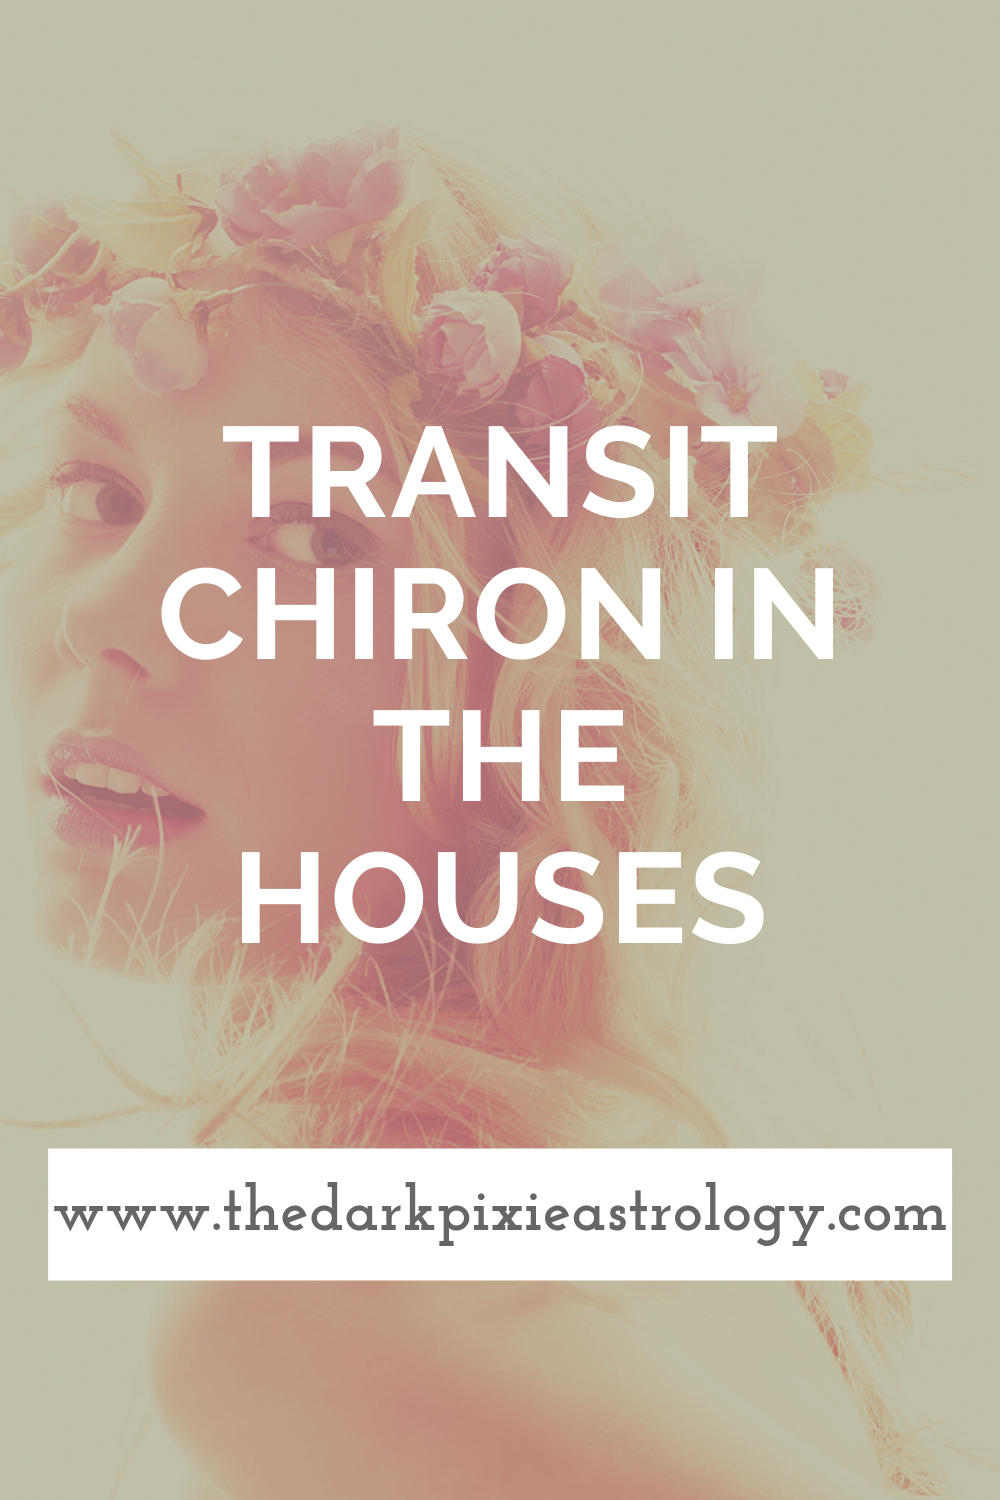 Transit Chiron in the Houses - The Dark Pixie Astrology